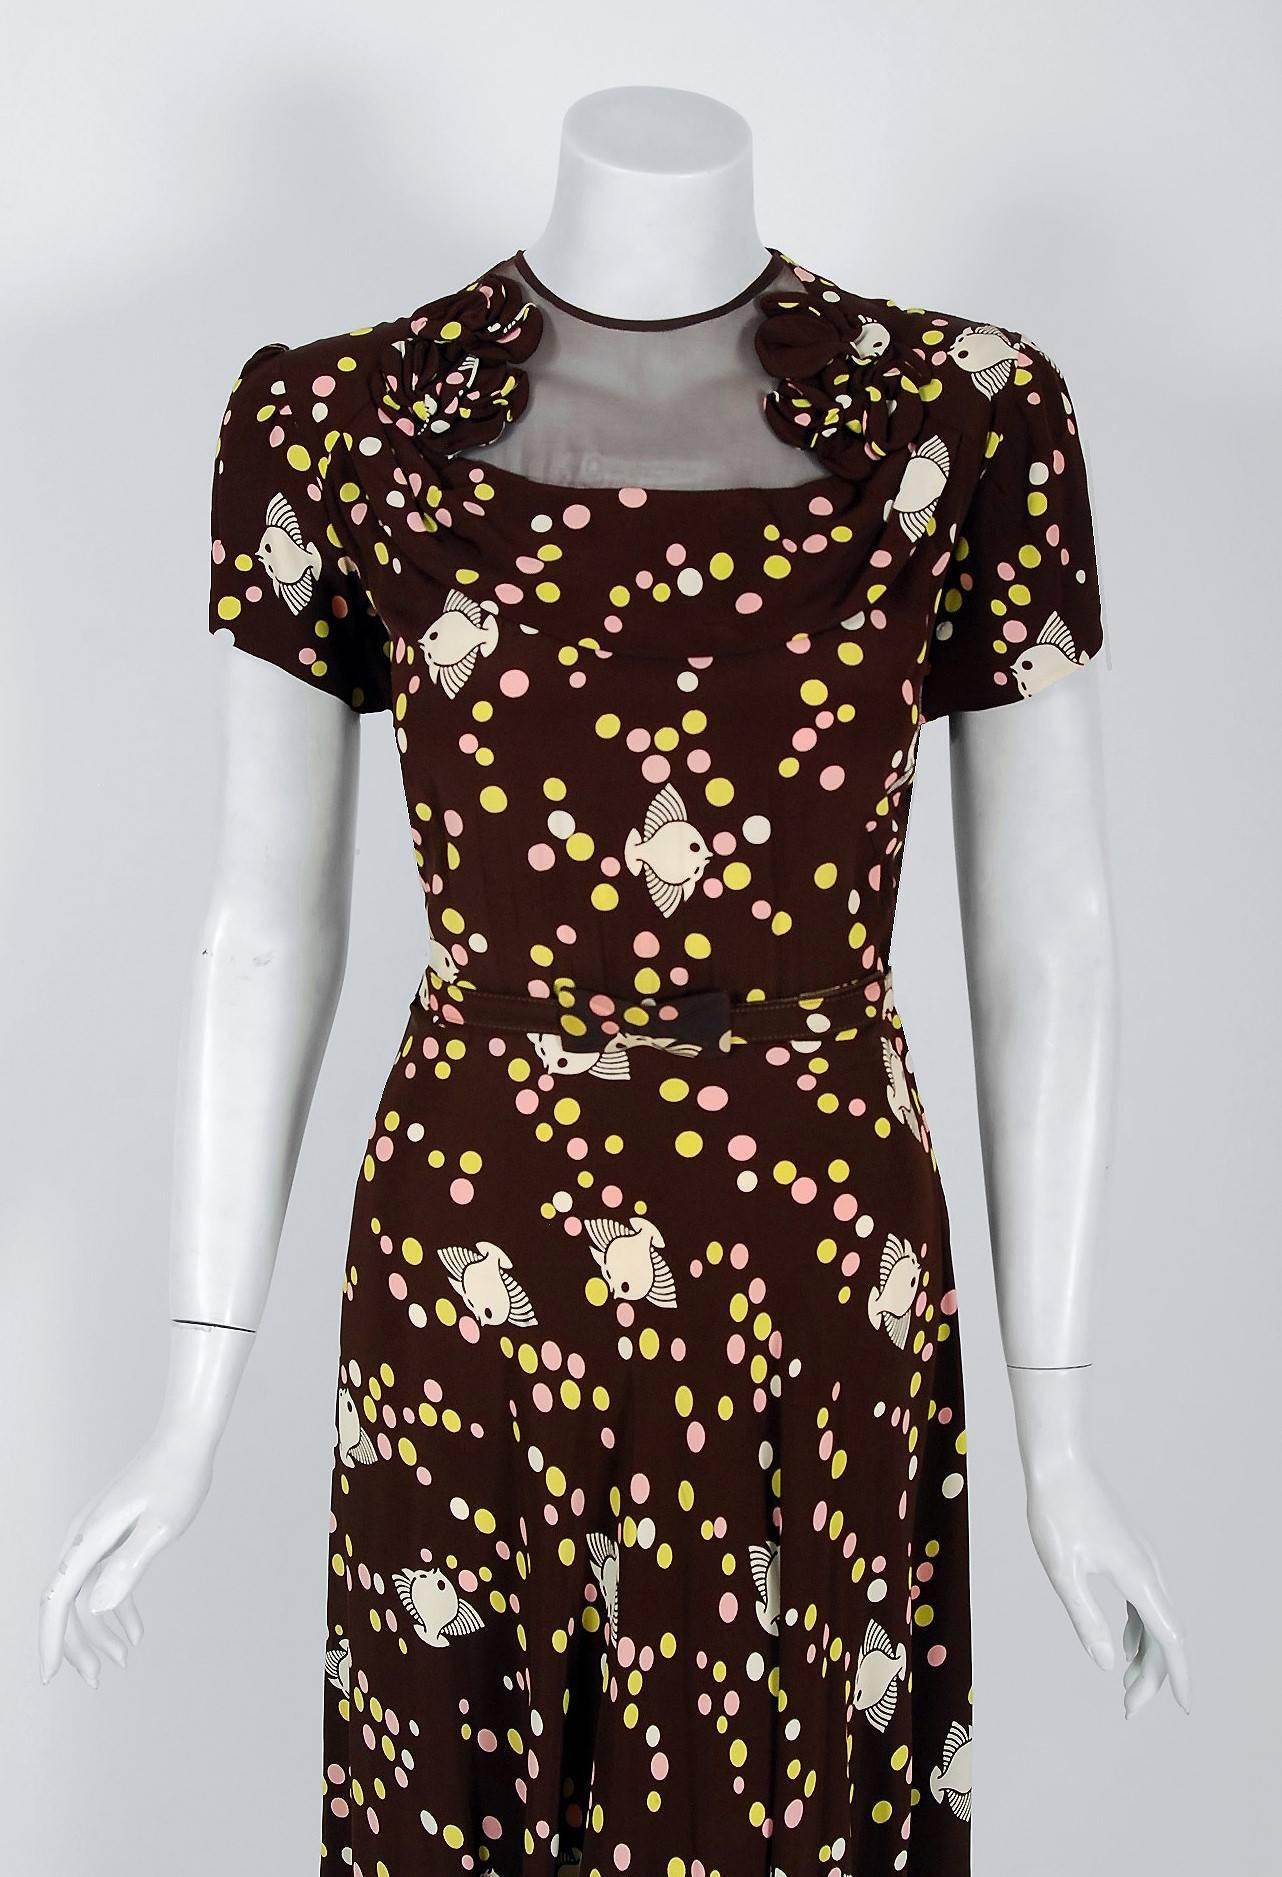 With its adorable swimming fish deco bubbles novelty print and flawless styling, this Semone Original dress has the casual elegance the 1940's were known for. The short-sleeve sheer illusion appliqued bodice is very flattering and effortless to